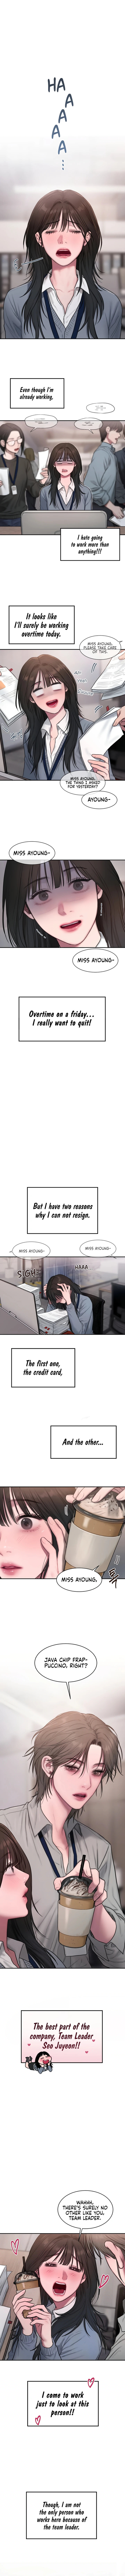 Finding Assistant Manager Kim - Chapter 1 Page 2